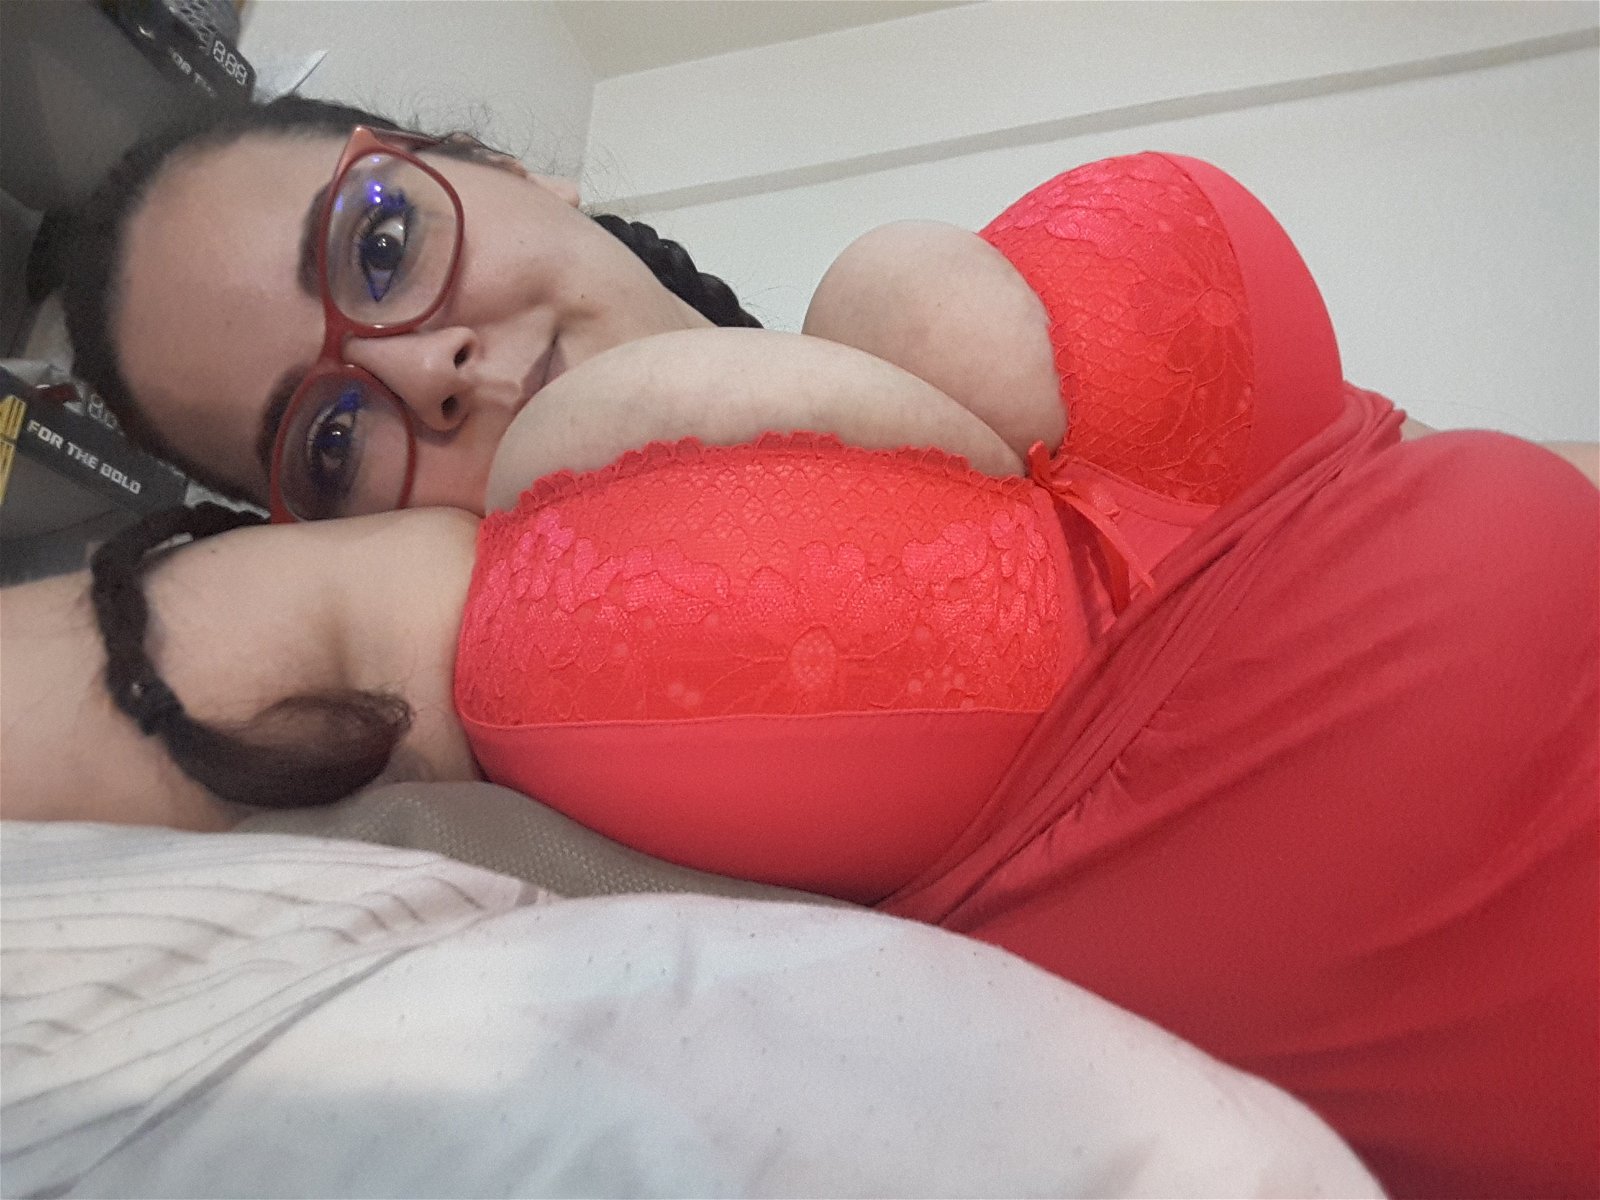 Watch the Photo by BustyVonKat with the username @BustyVonKat, who is a star user, posted on February 25, 2019. The post is about the topic Busty Chicks. and the text says '💋🦄'